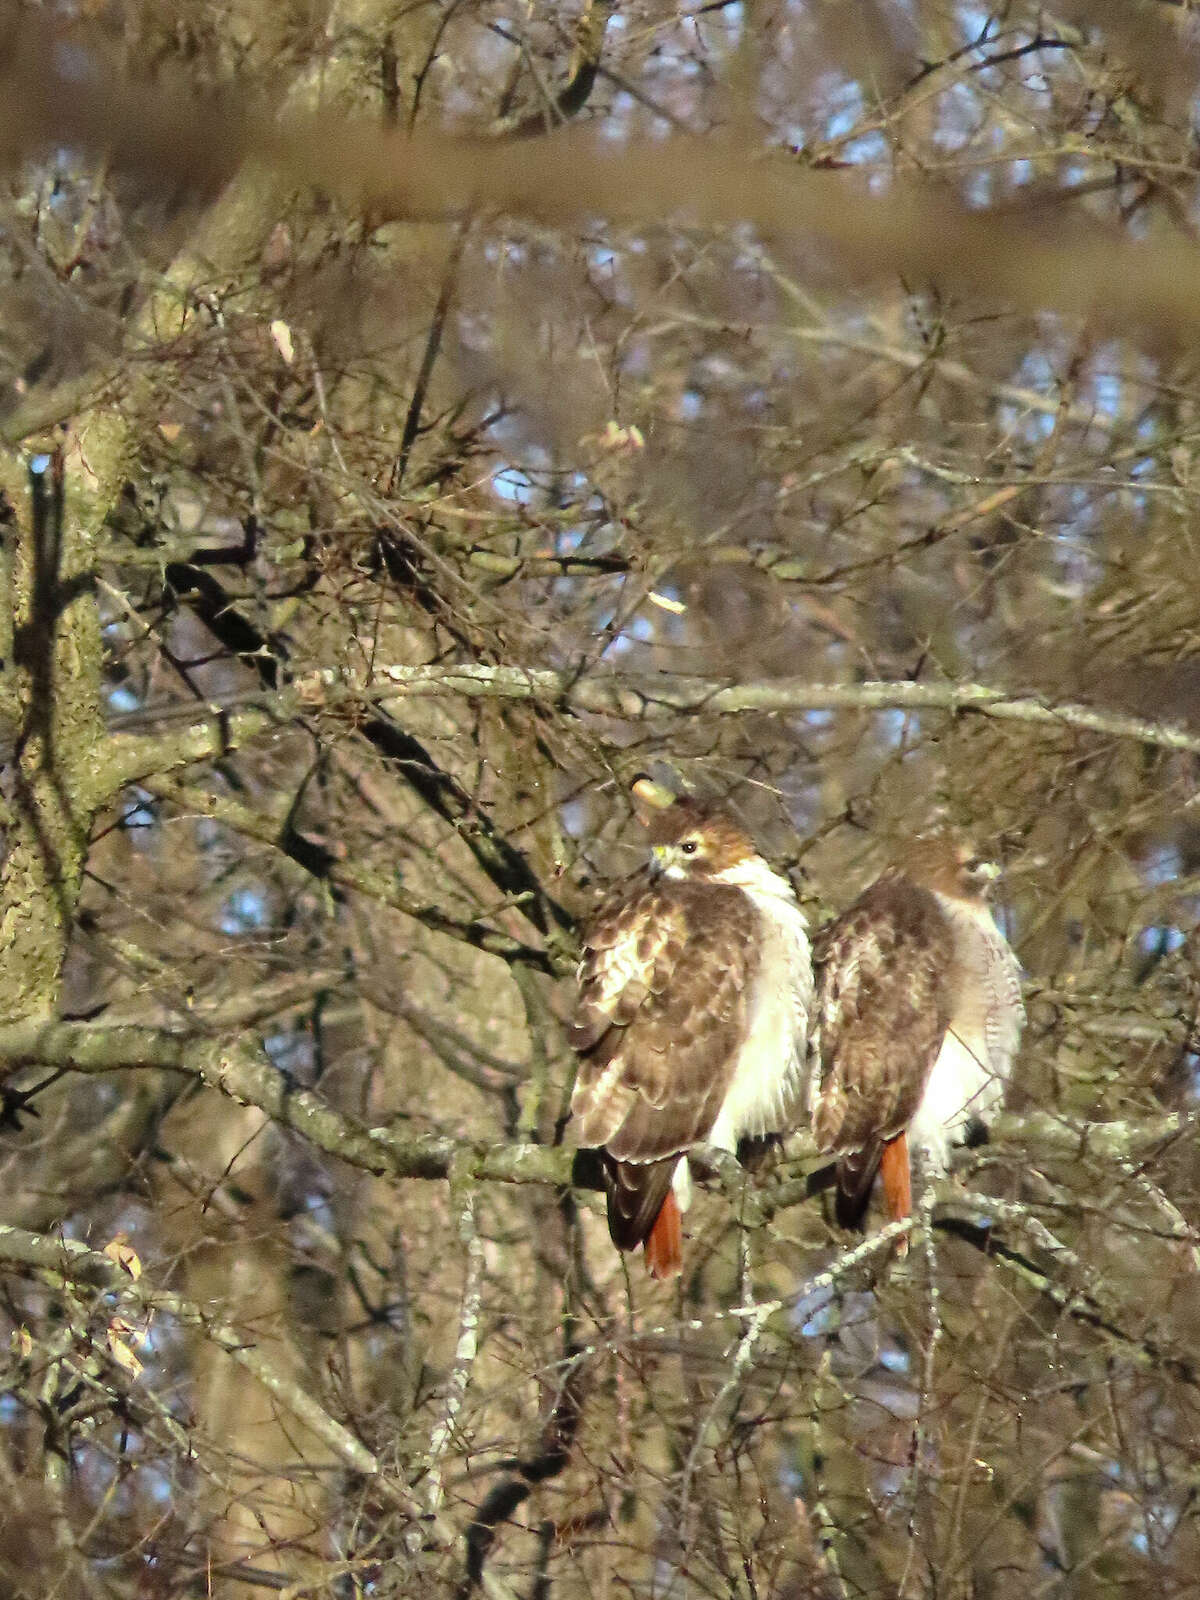 Red-tailed hawks huddle together against the temperatures during the weekend cold snap.